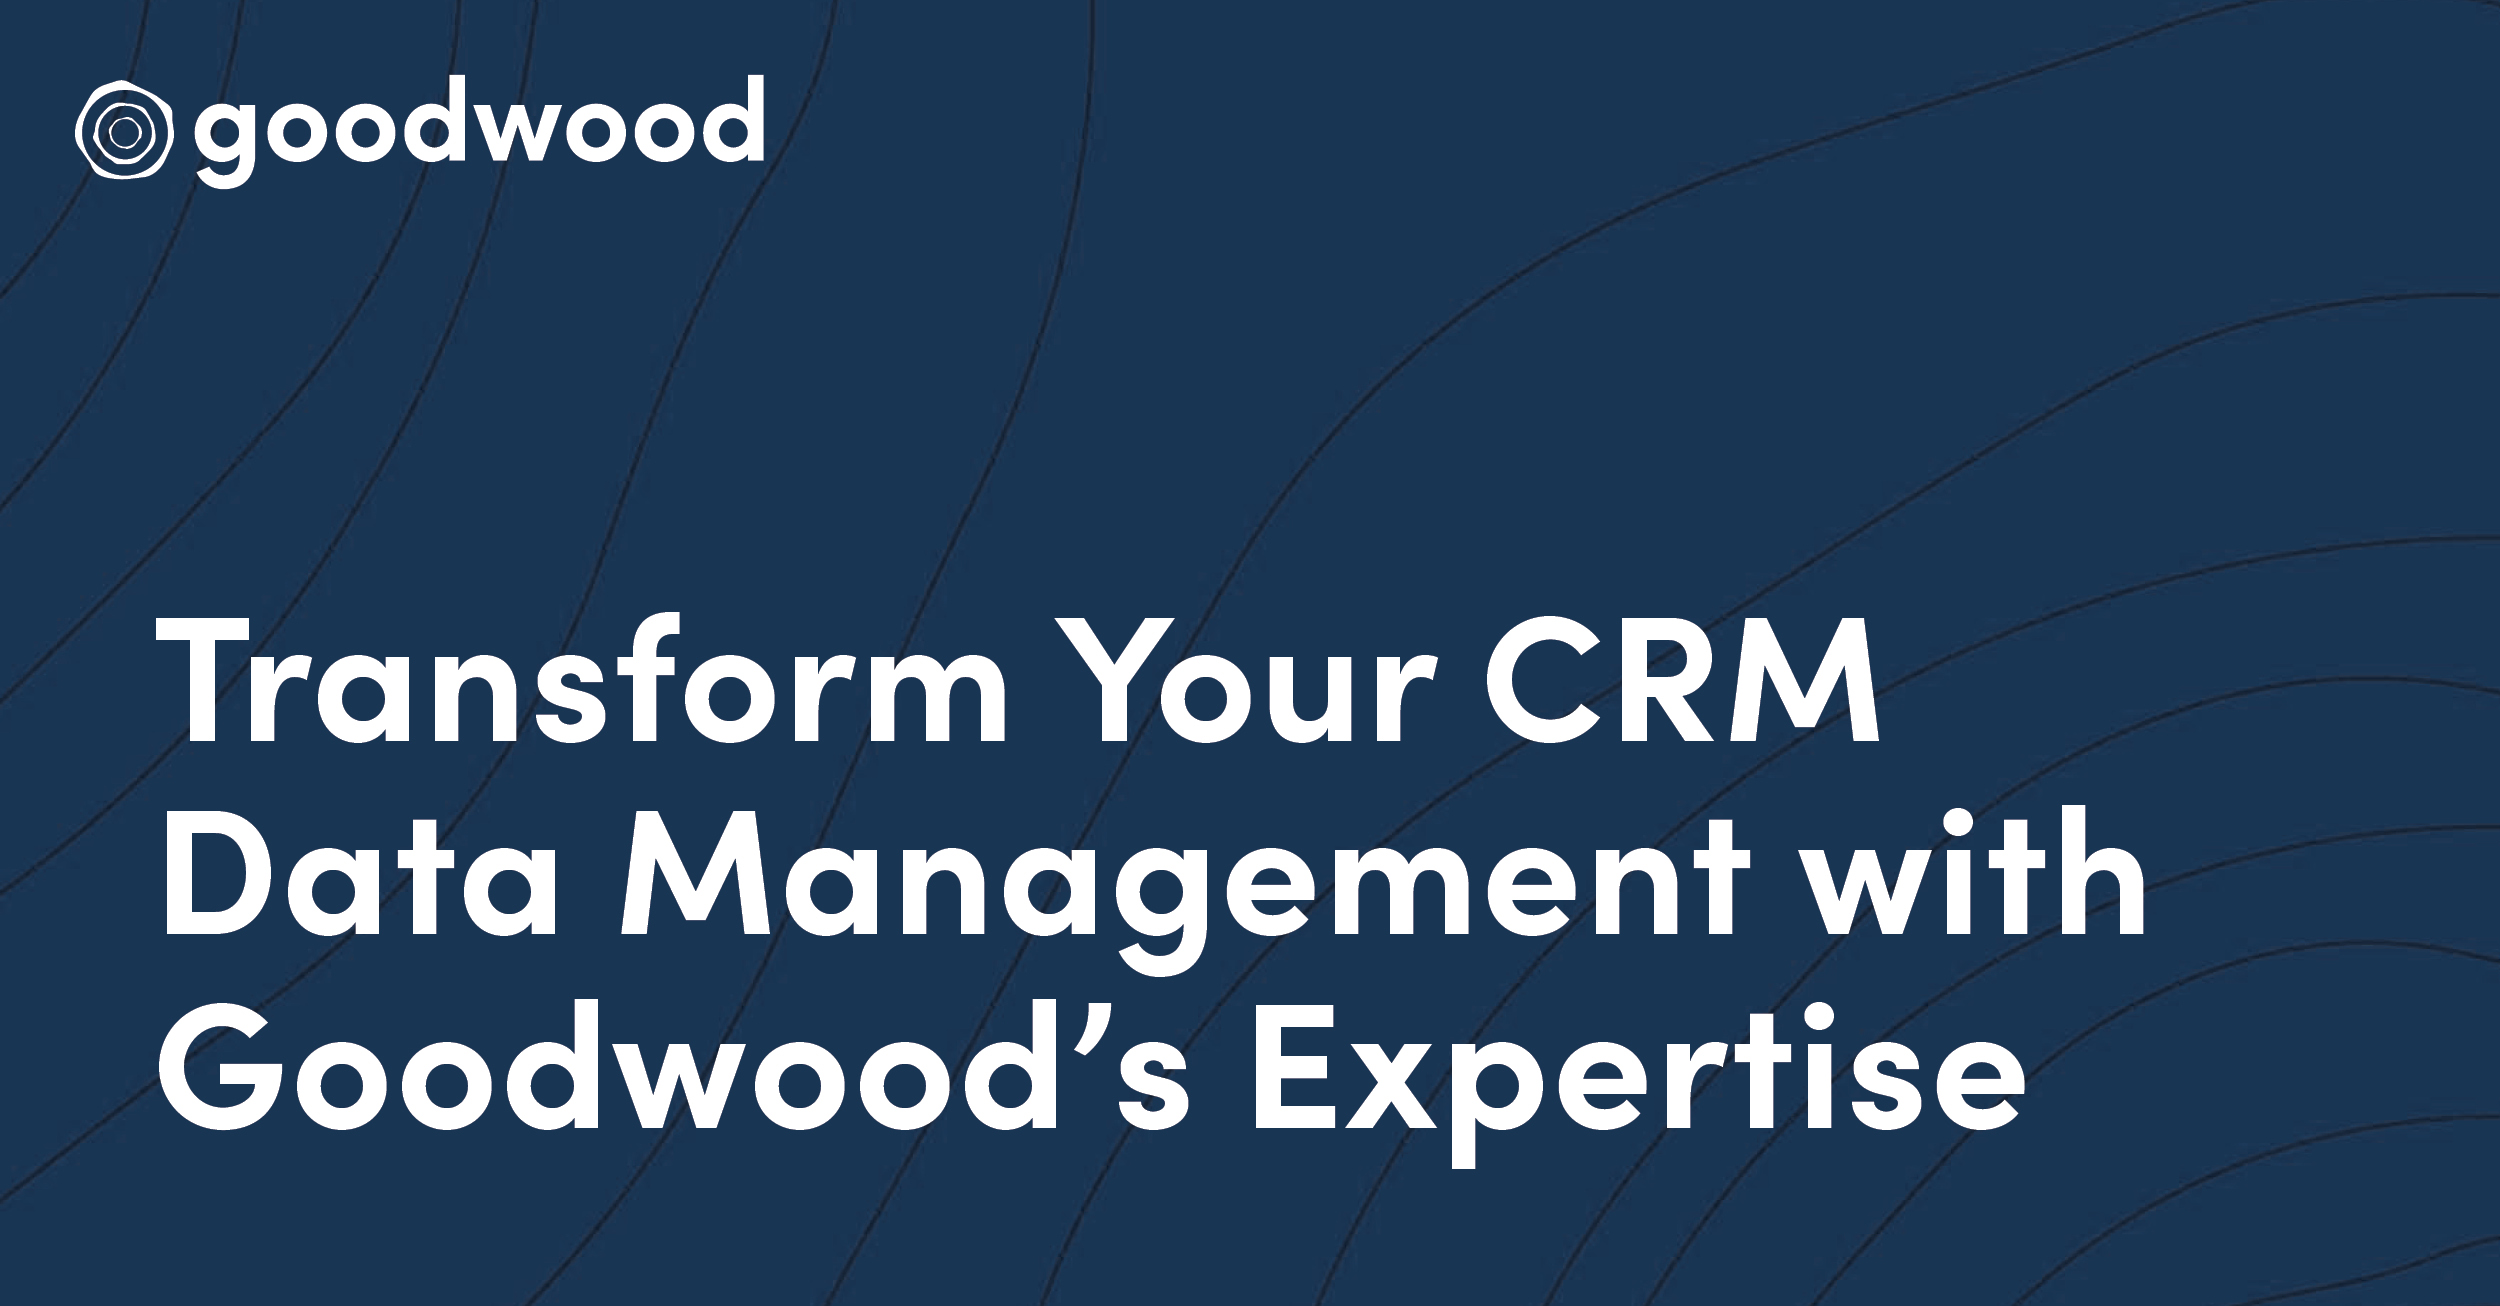 Transform Your CRM Data Management with Goodwood's Expertise